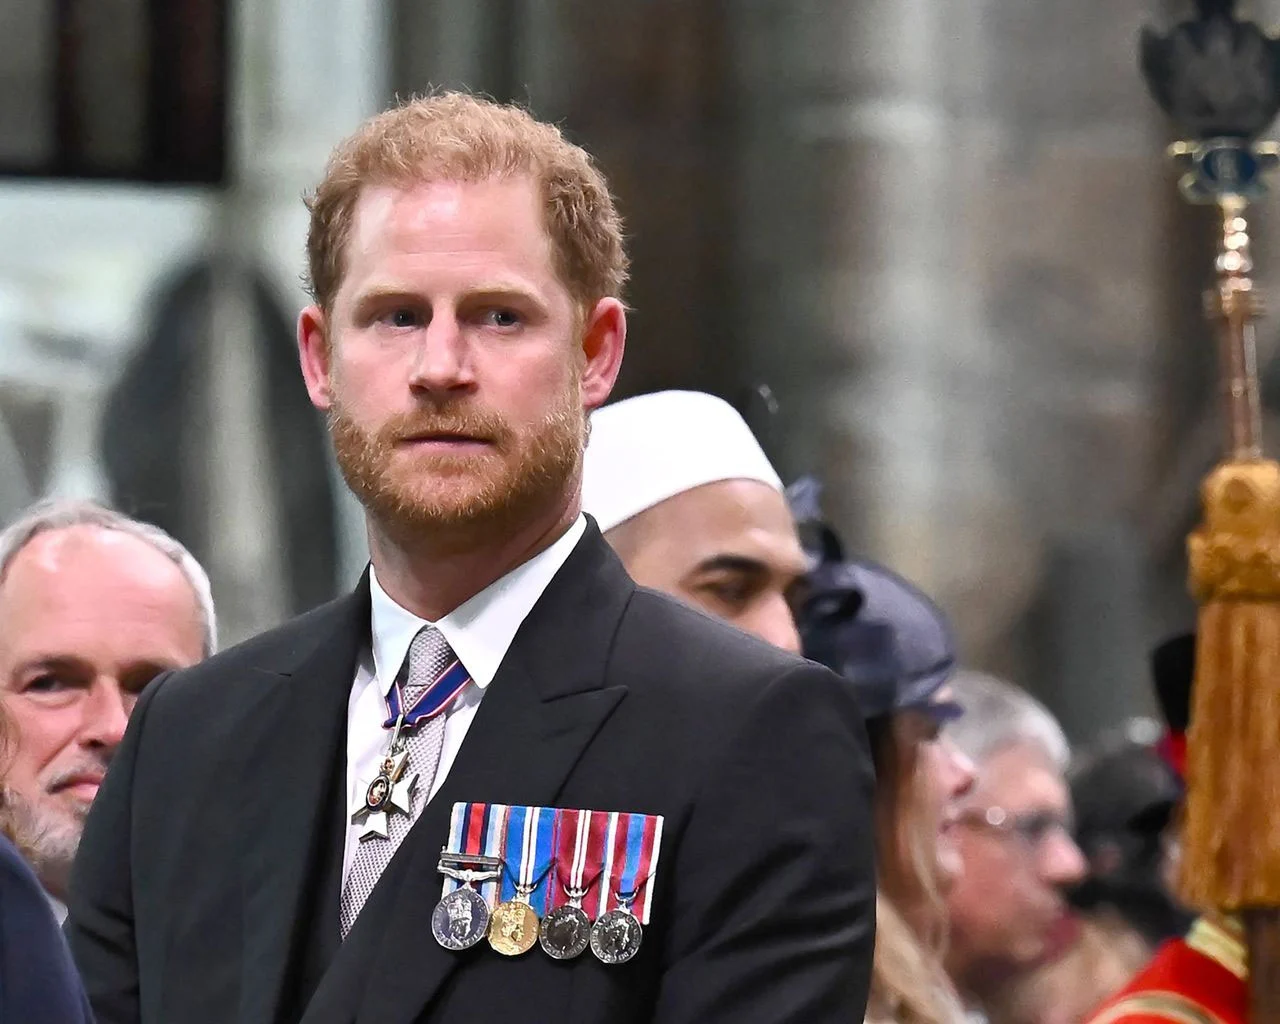 prince-harrys-awkward-appearance-at-coronation-sparks-criticism